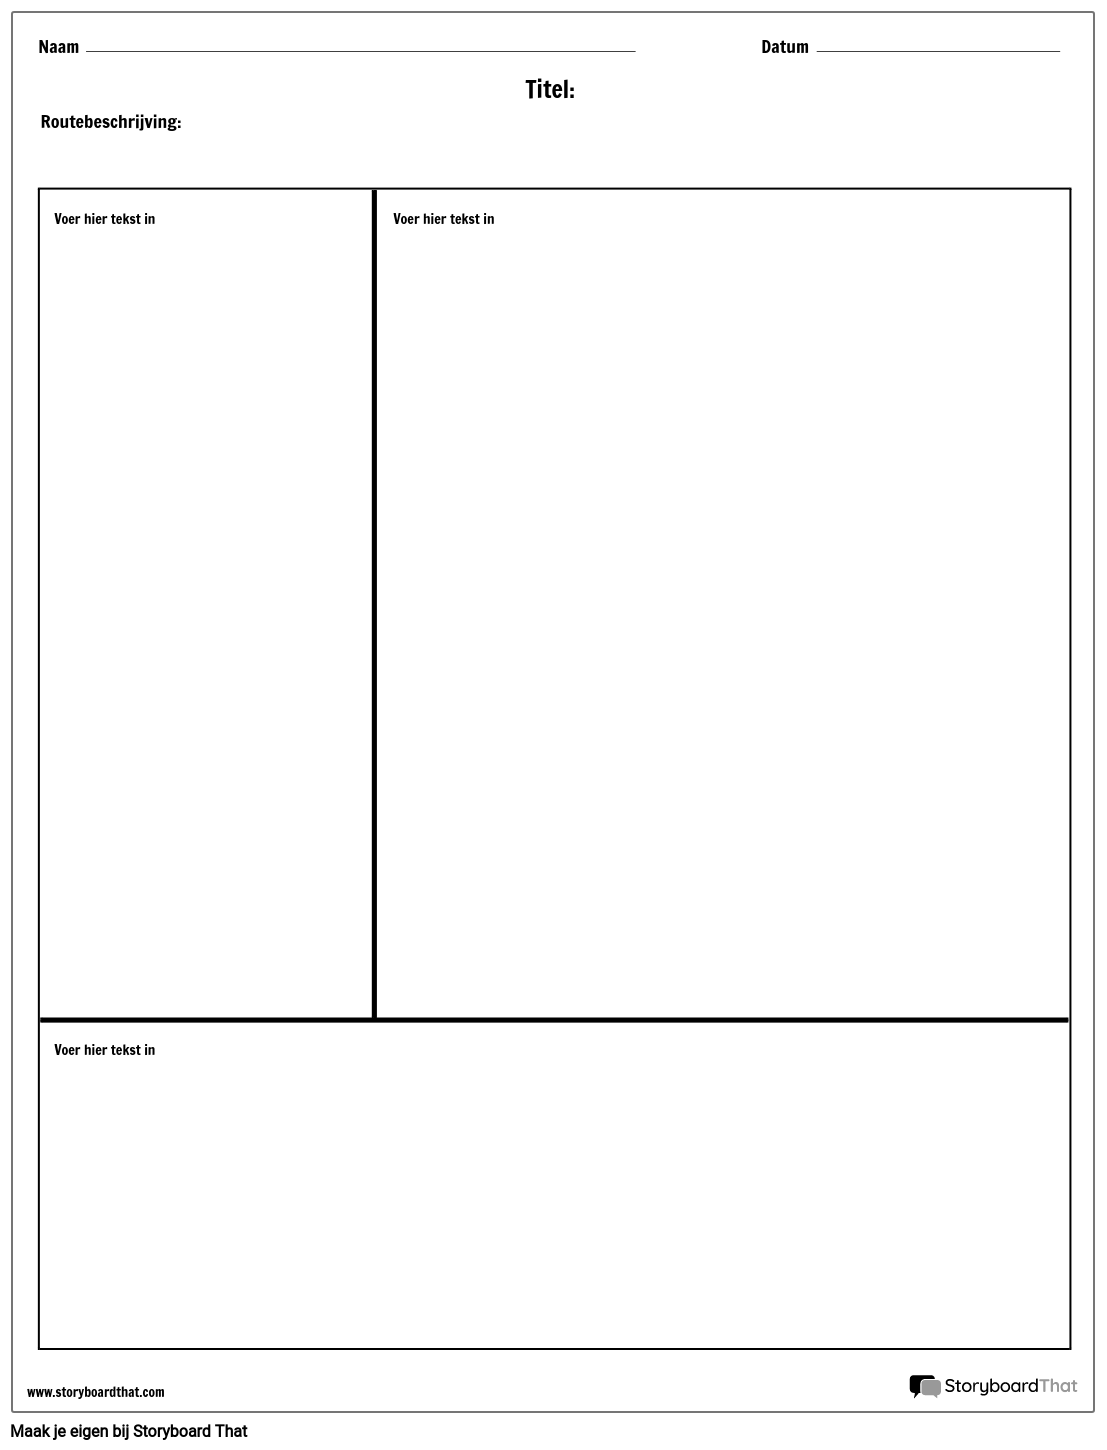 Cornell Notes - Basis